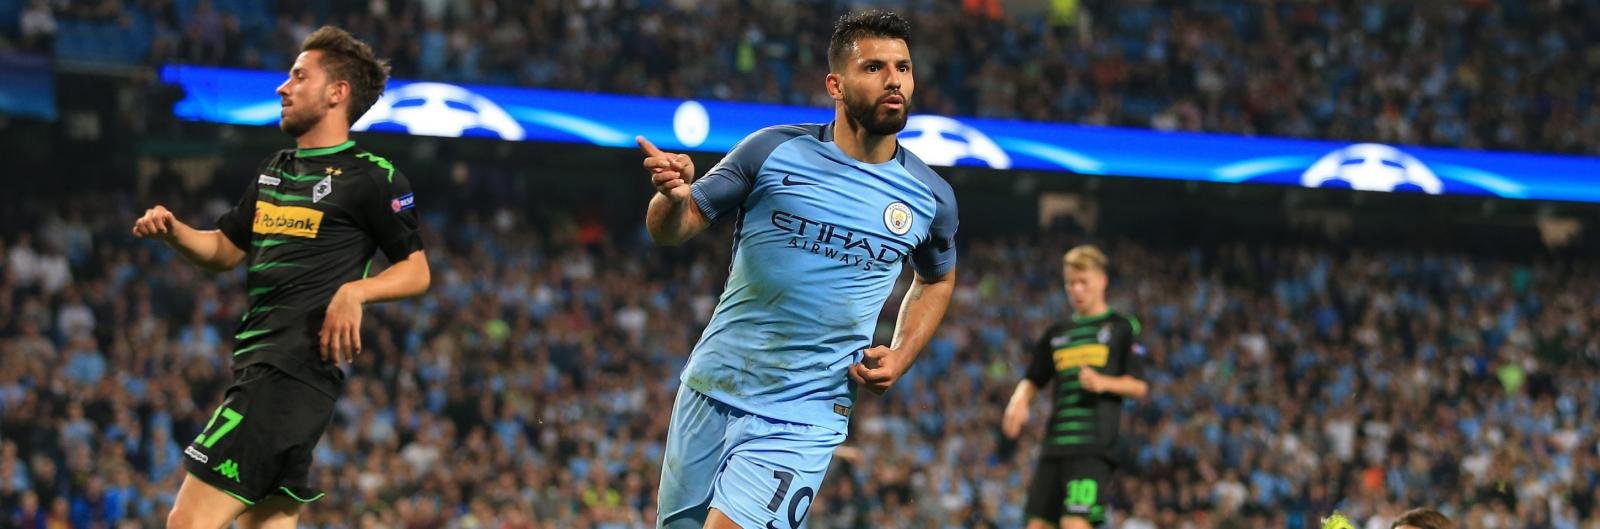 Manchester City vs AFC Bournemouth: Preview & Prediction